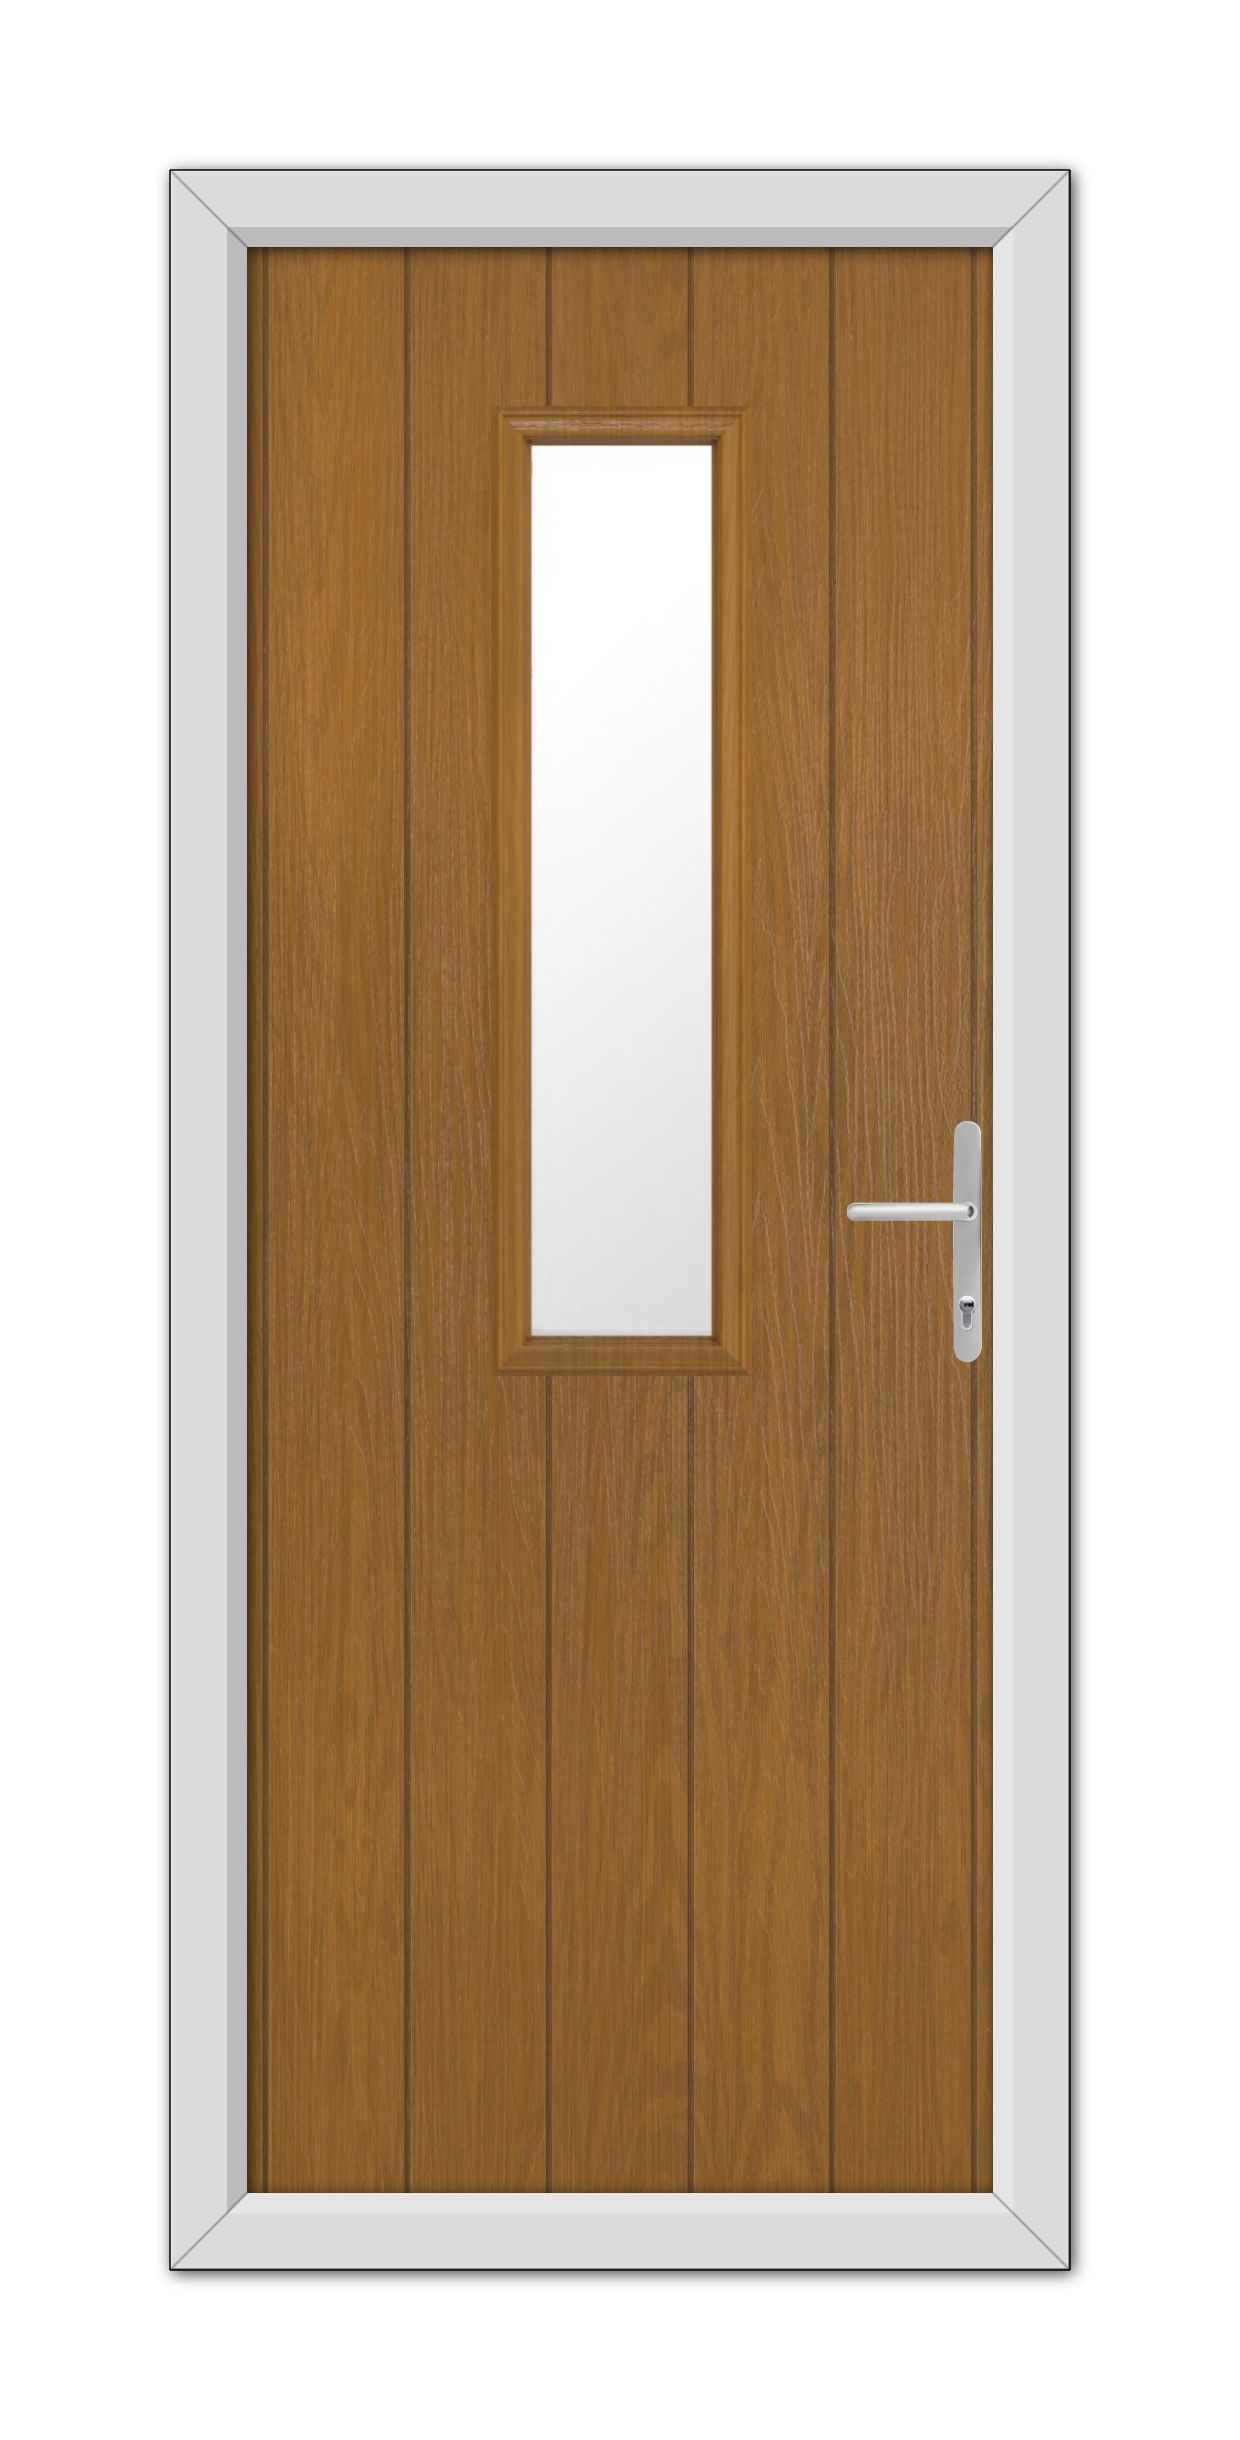 A modern Oak Mowbray Composite Door 48mm Timber Core with a central vertical glass panel and a white handle, set in a white frame.